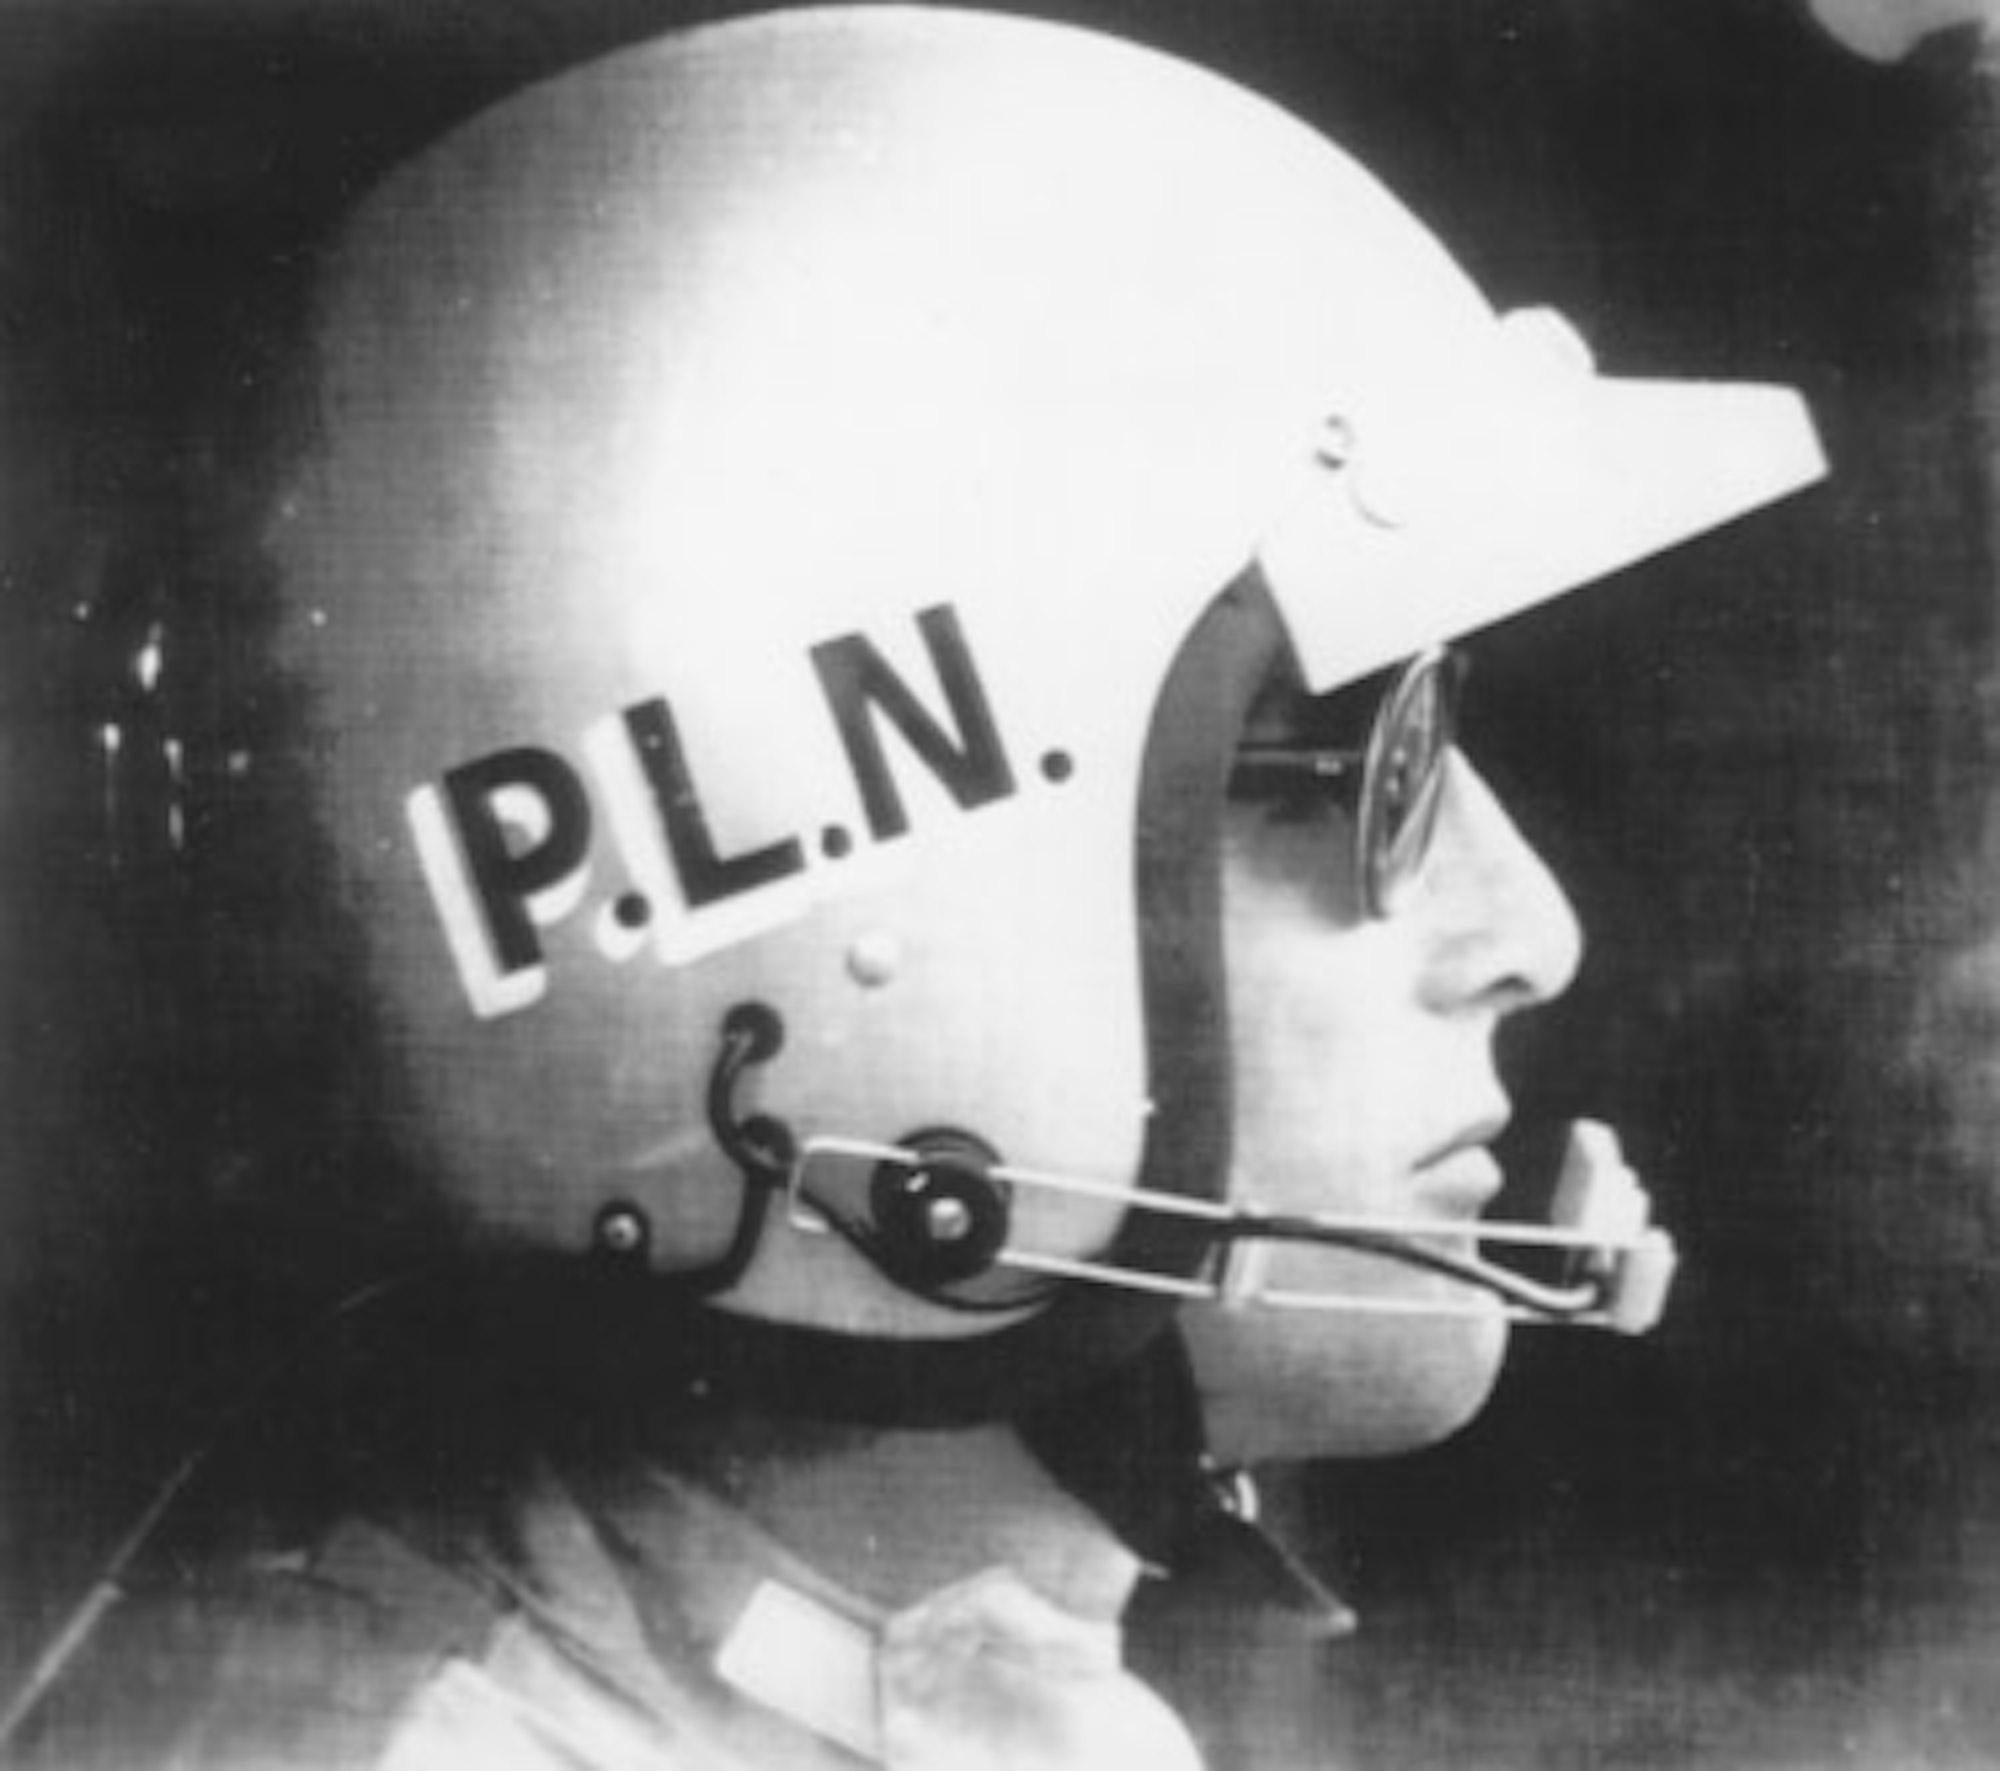 Unknown Figurative Photograph - Paul Newman During a Car Race - Vintage Photo - 1970s